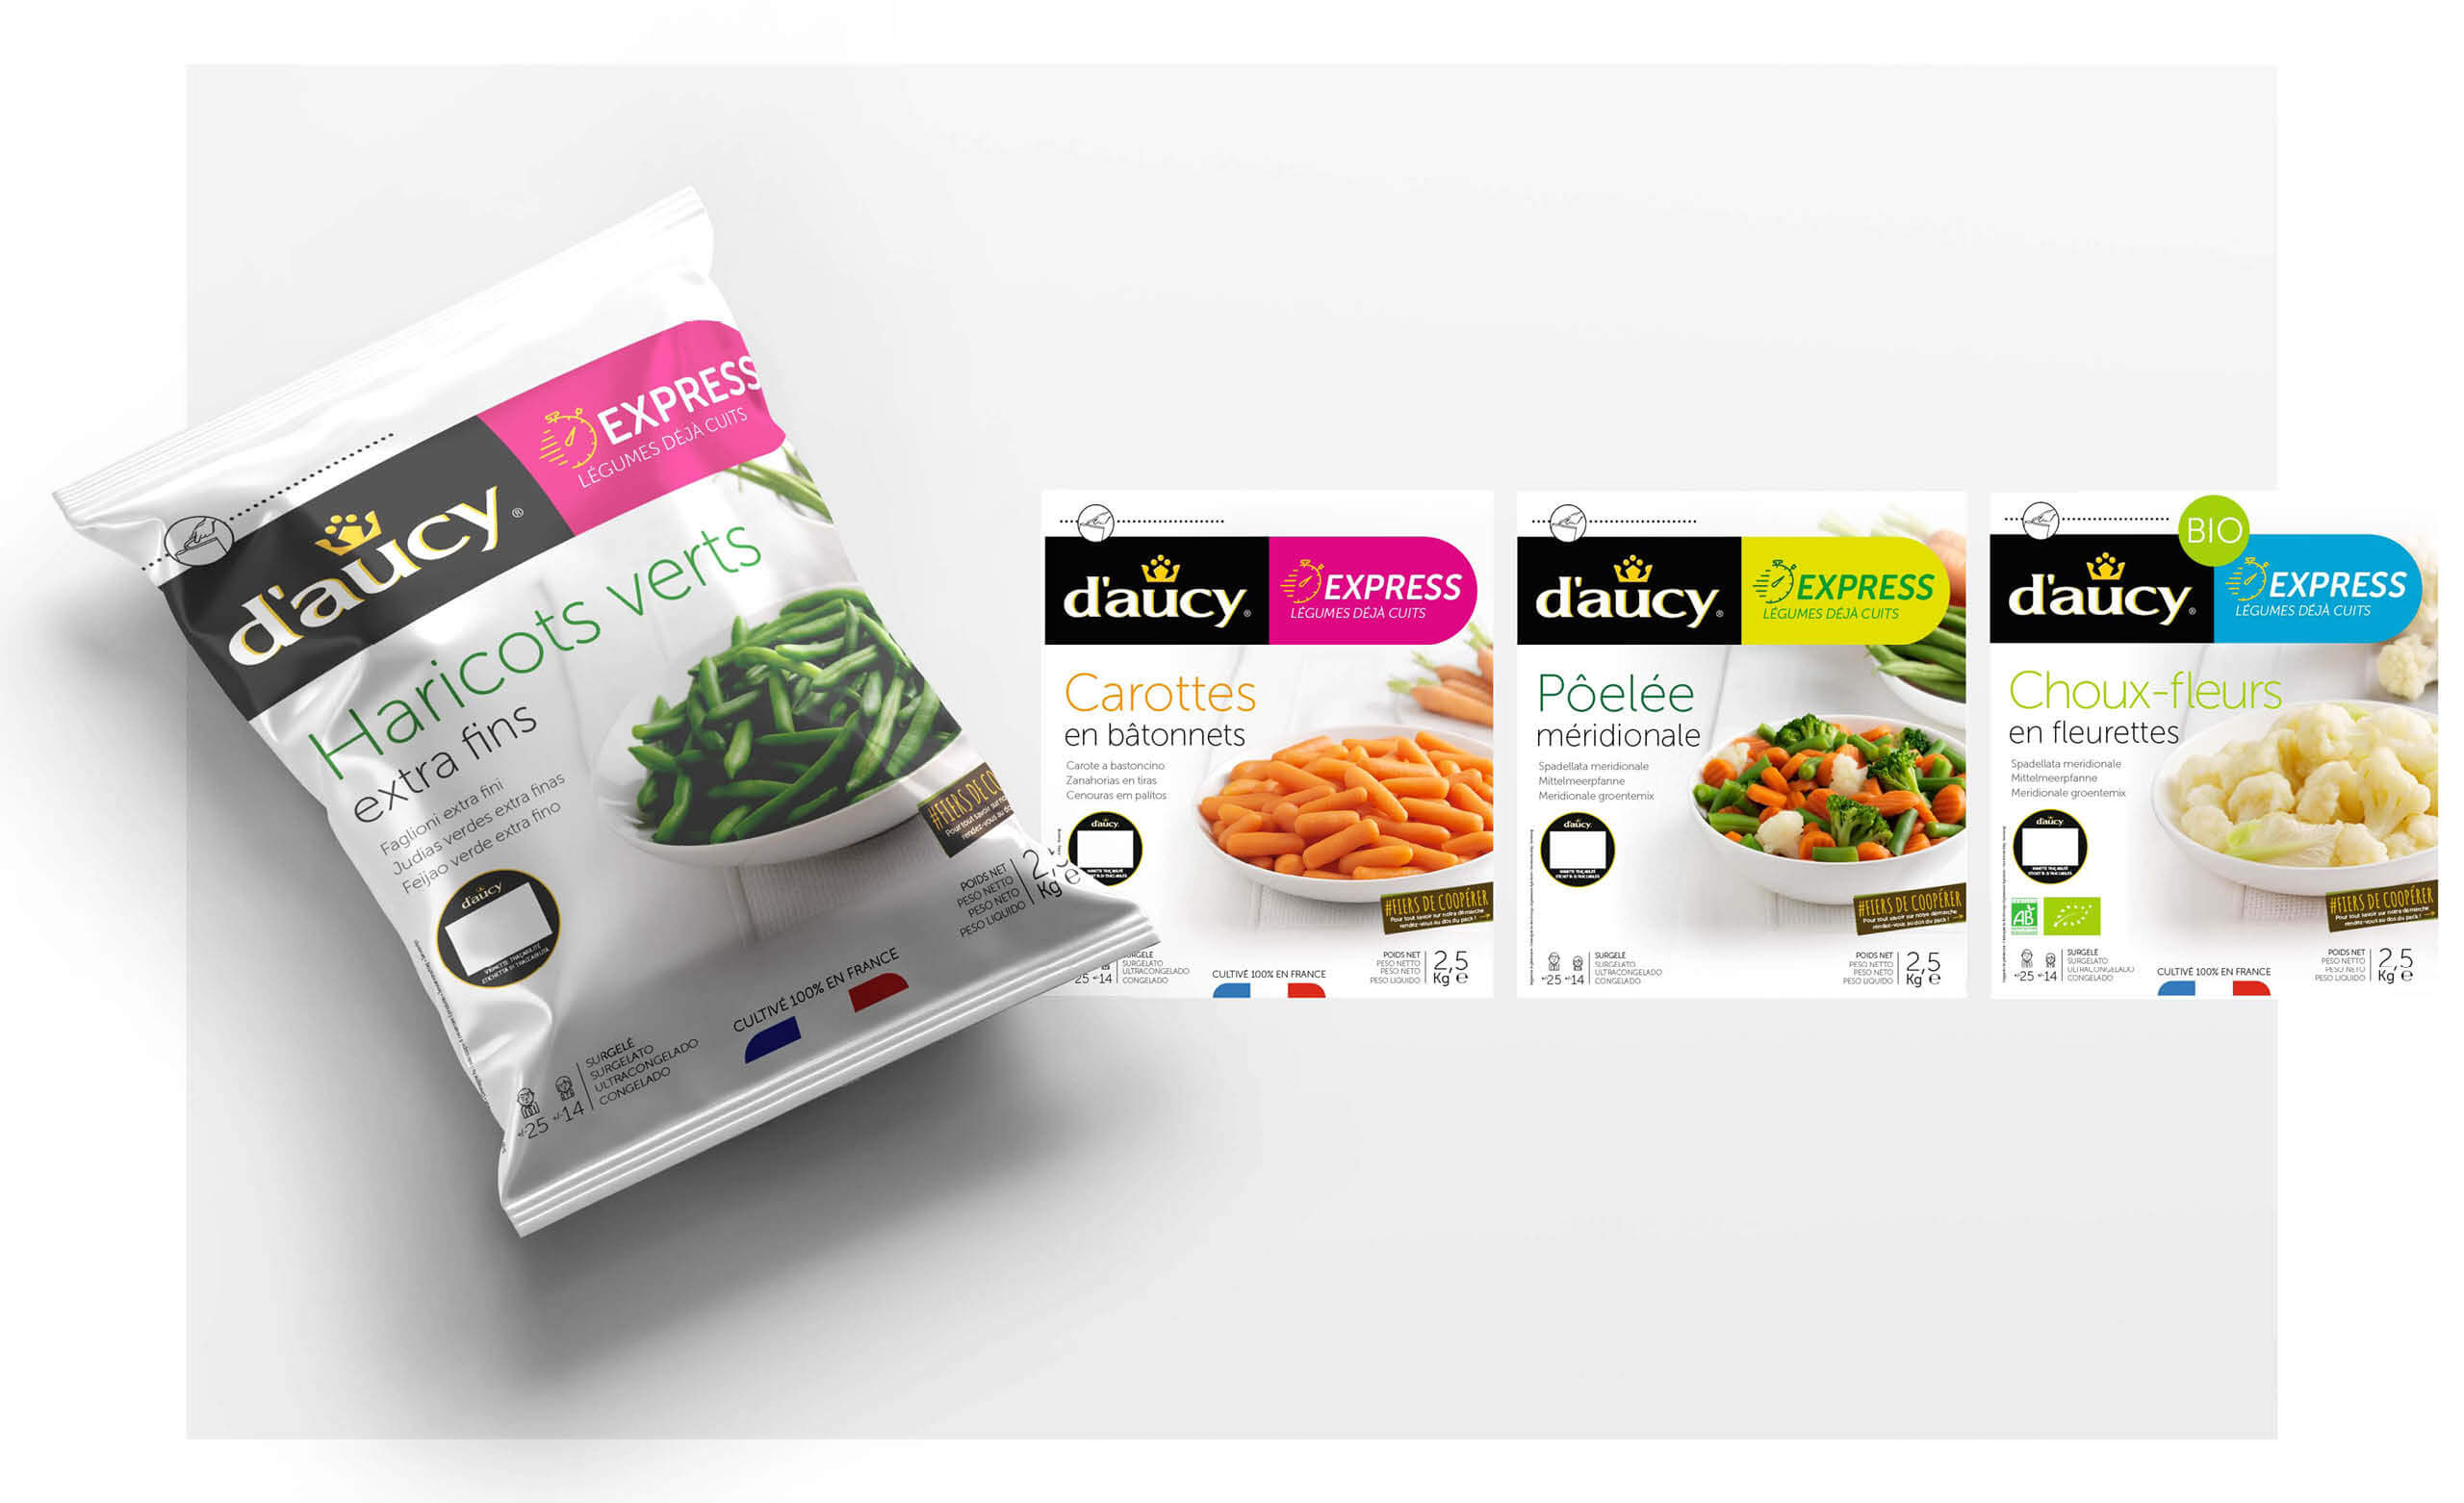 Proposition refonte charte packaging d'aucy